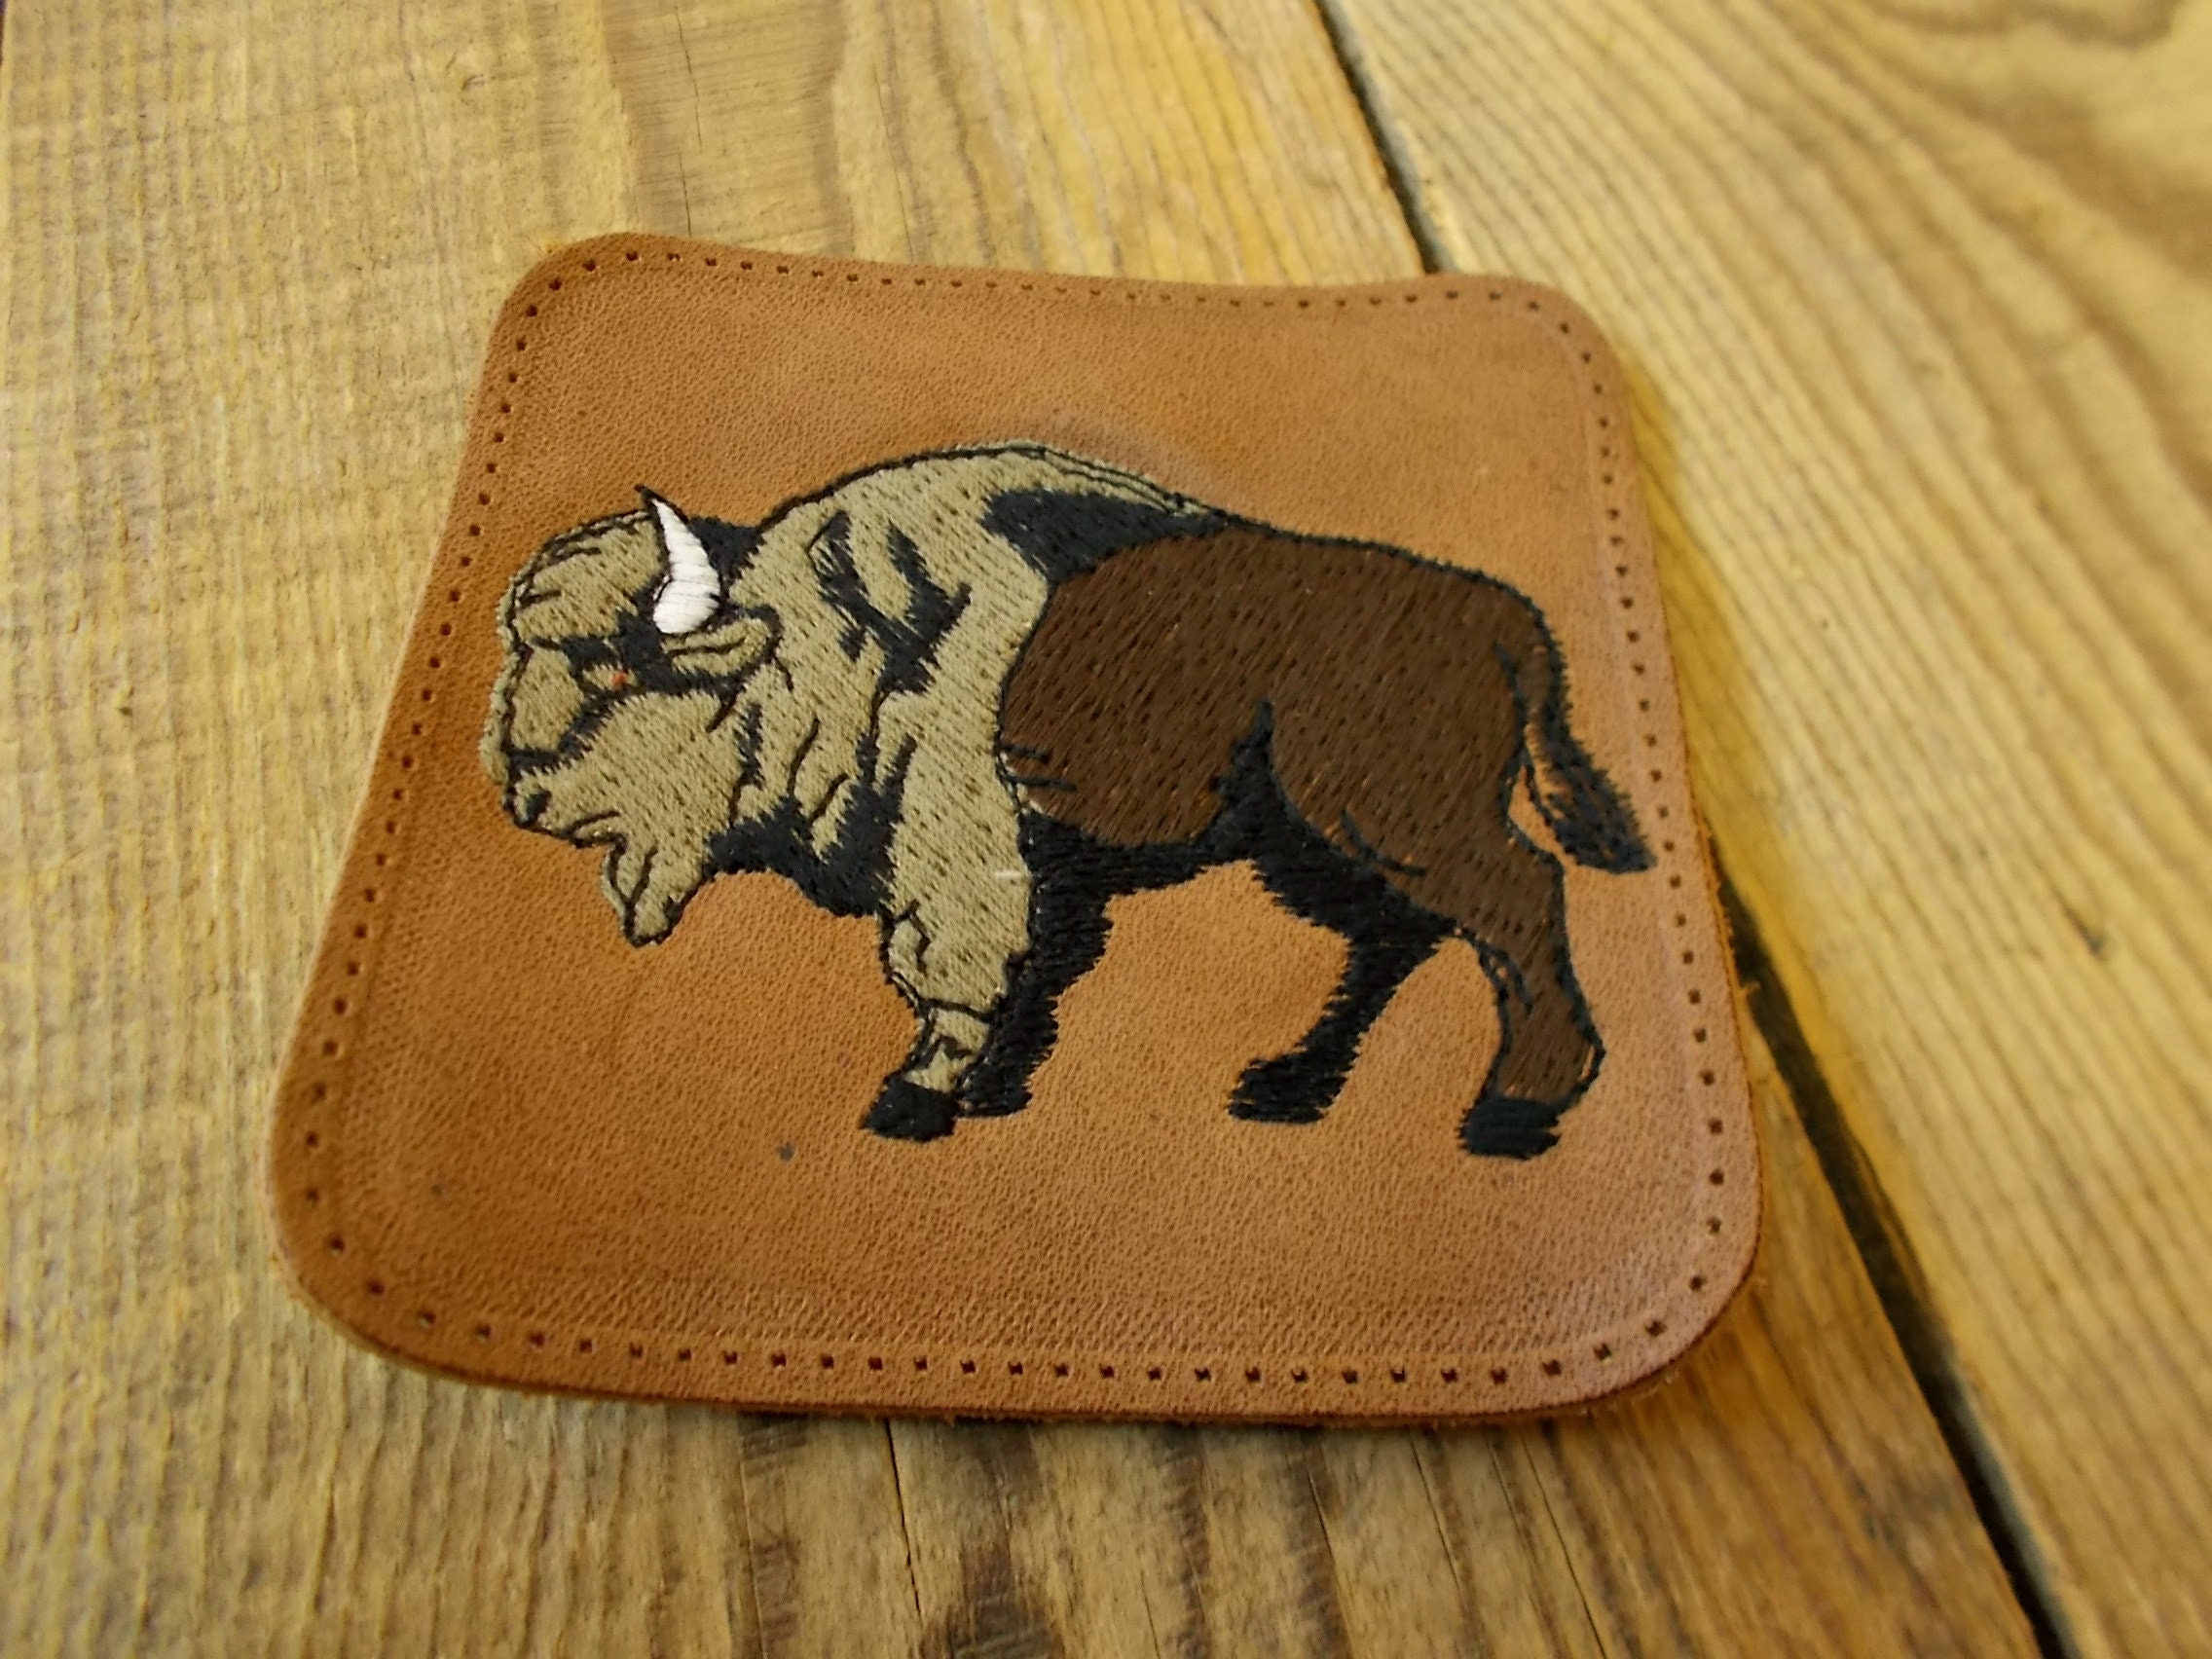  Kona Cotton Bison, Fabric by the Yard